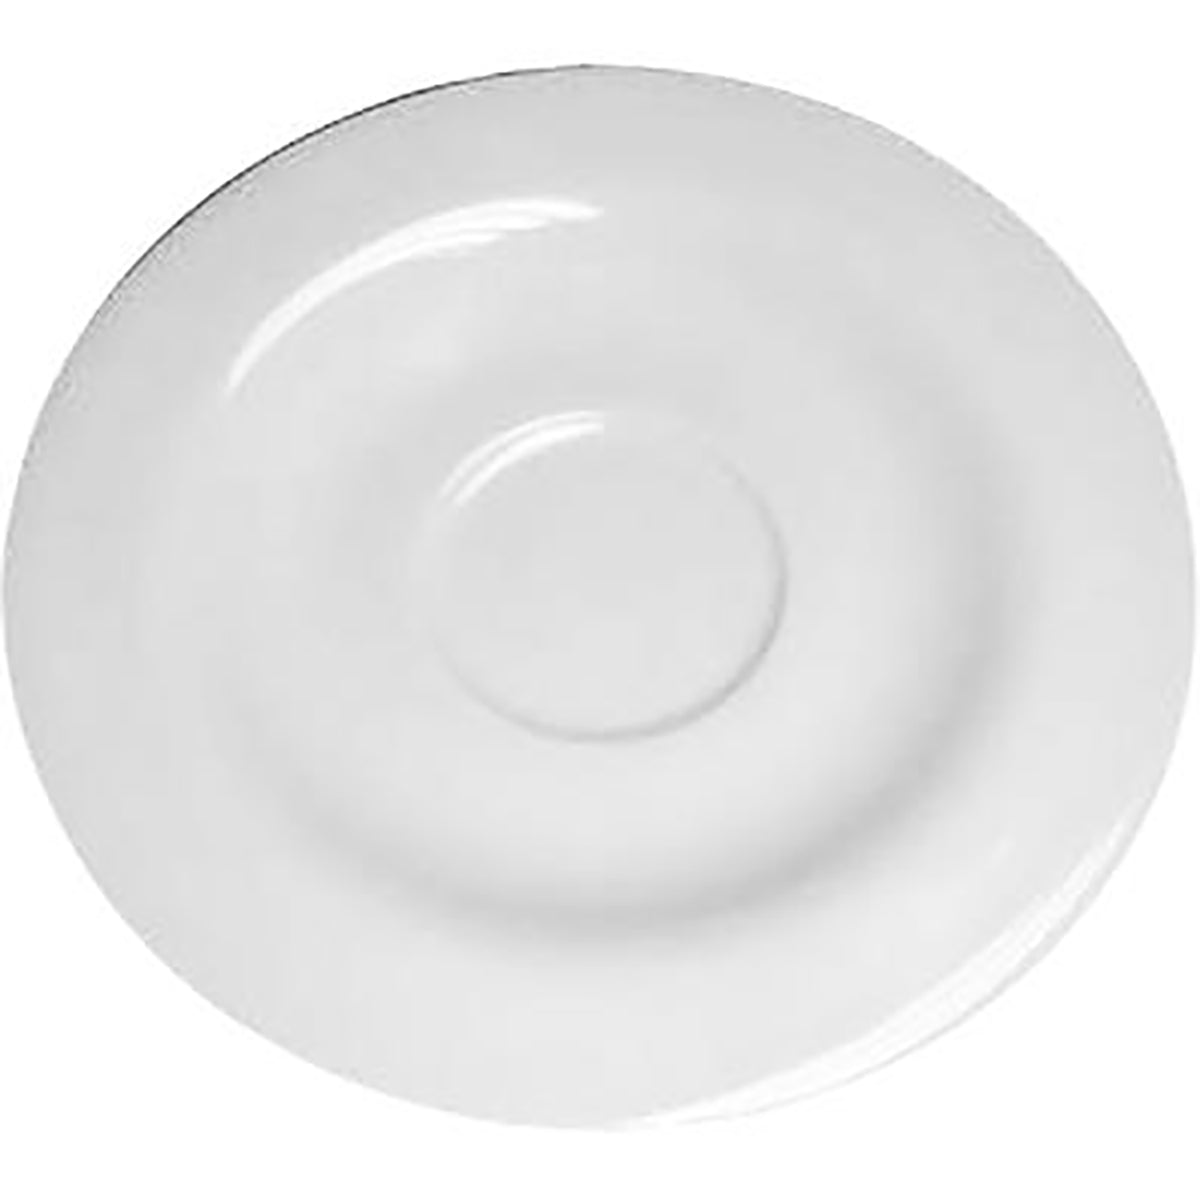 95595 Royal Bone China Saucer To Fit 95590 95592 & 95042 Cups (N2912) Tomkin Australia Hospitality Supplies